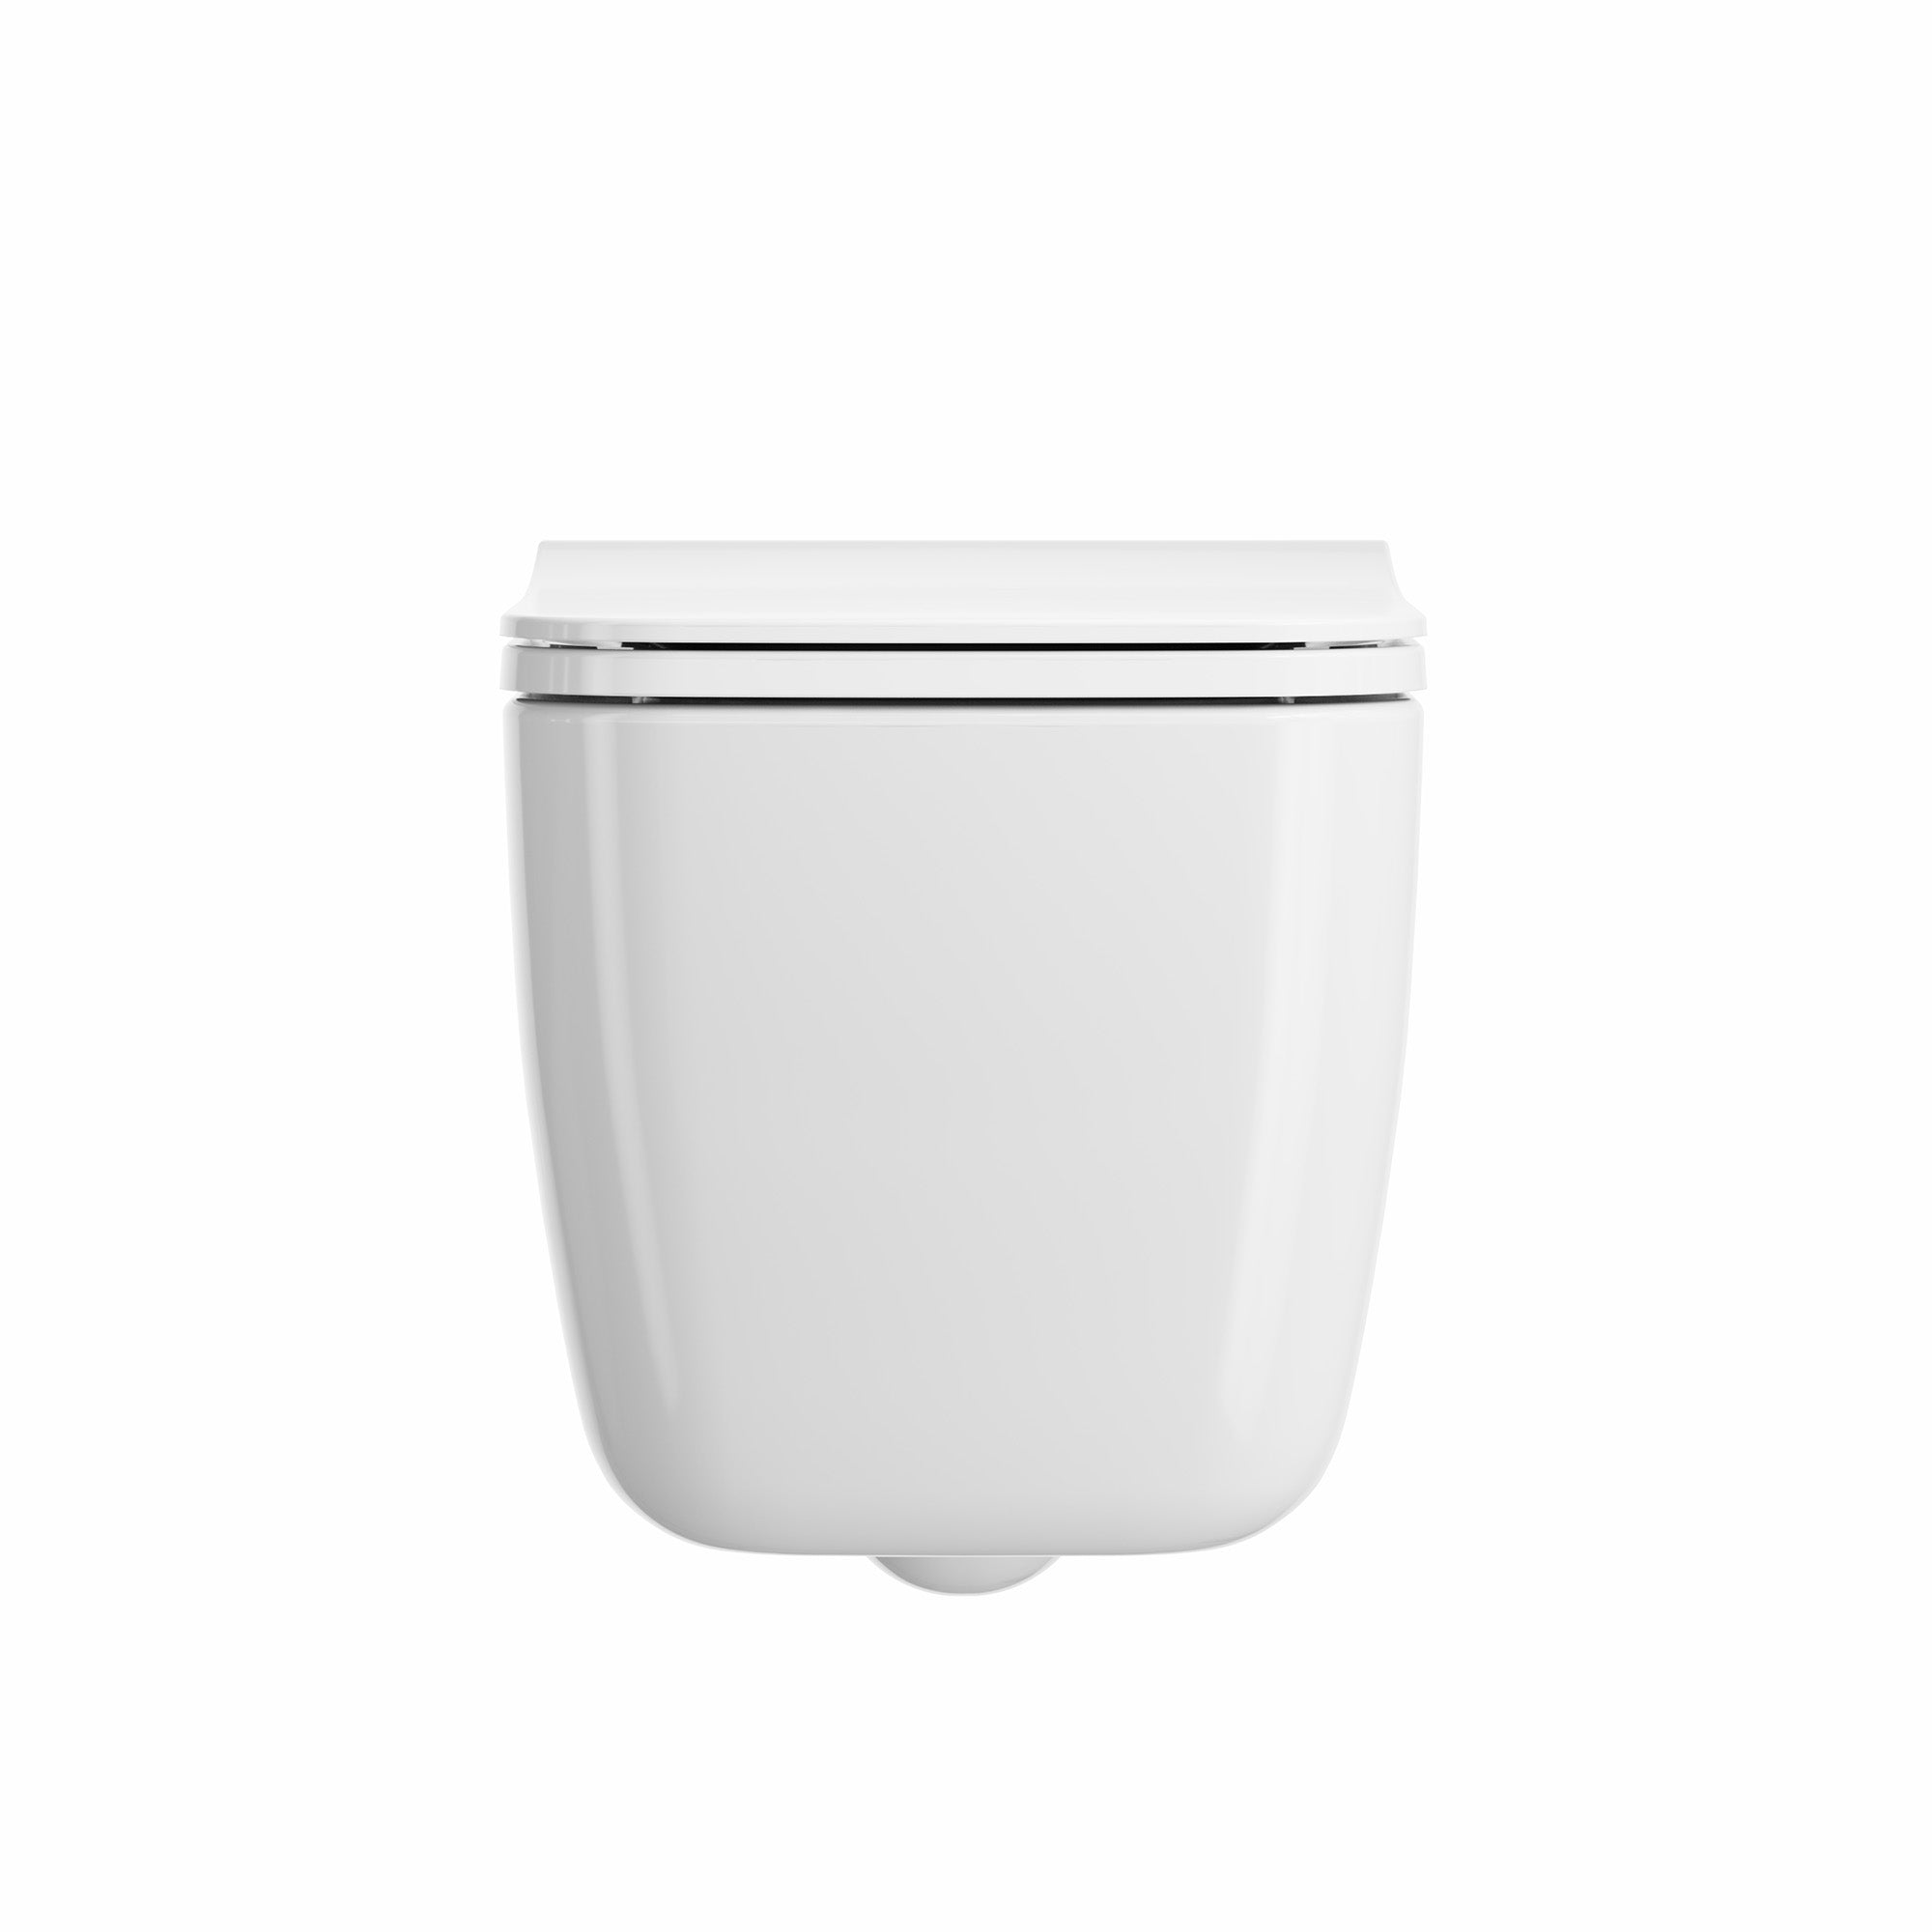 crosswater libra wall hung wc pan and square slim seat gloss white